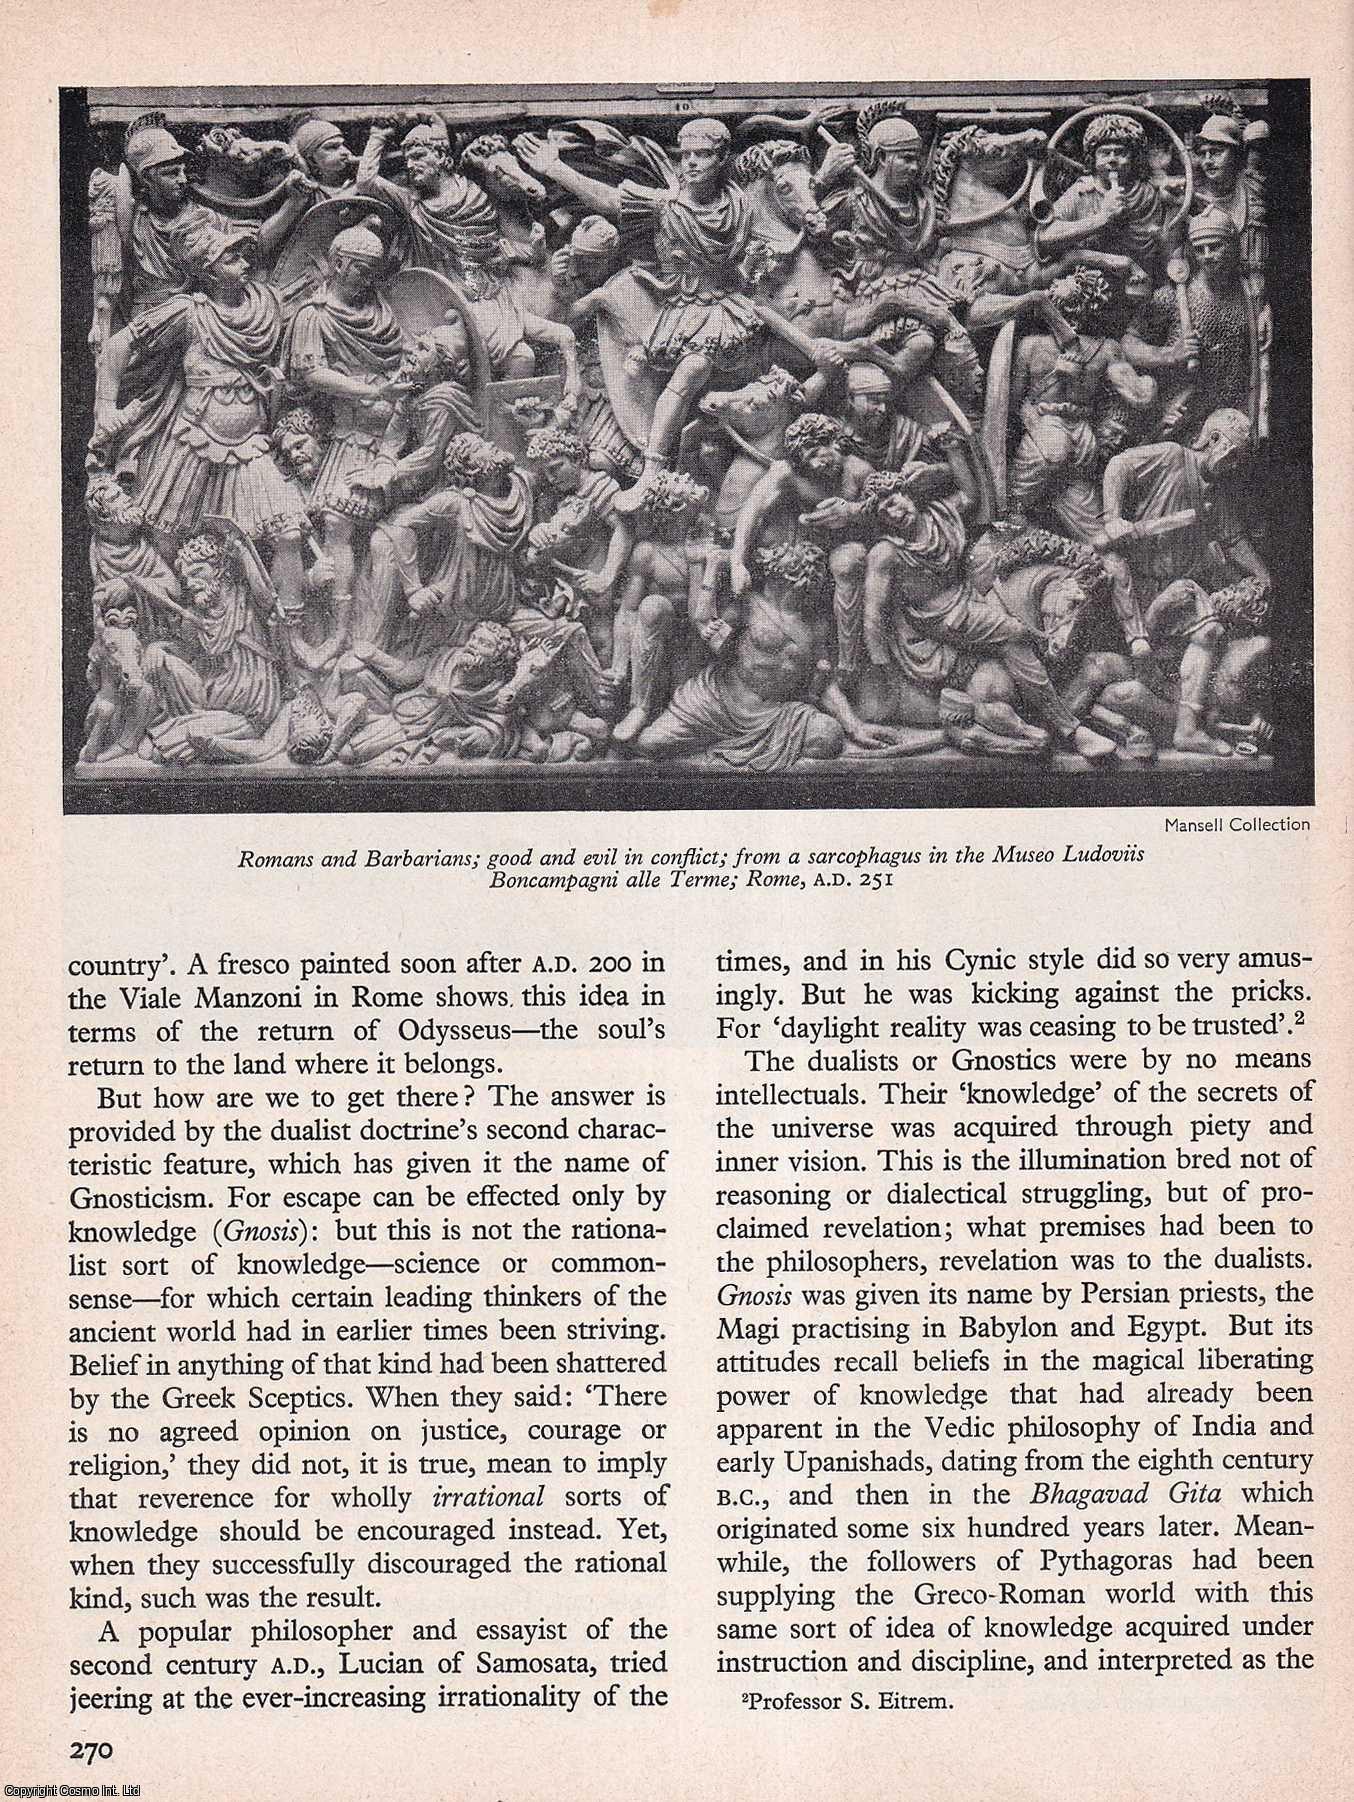 Michael Grant - The Gods of Light and Darkness. An original article from History Today magazine, 1968.